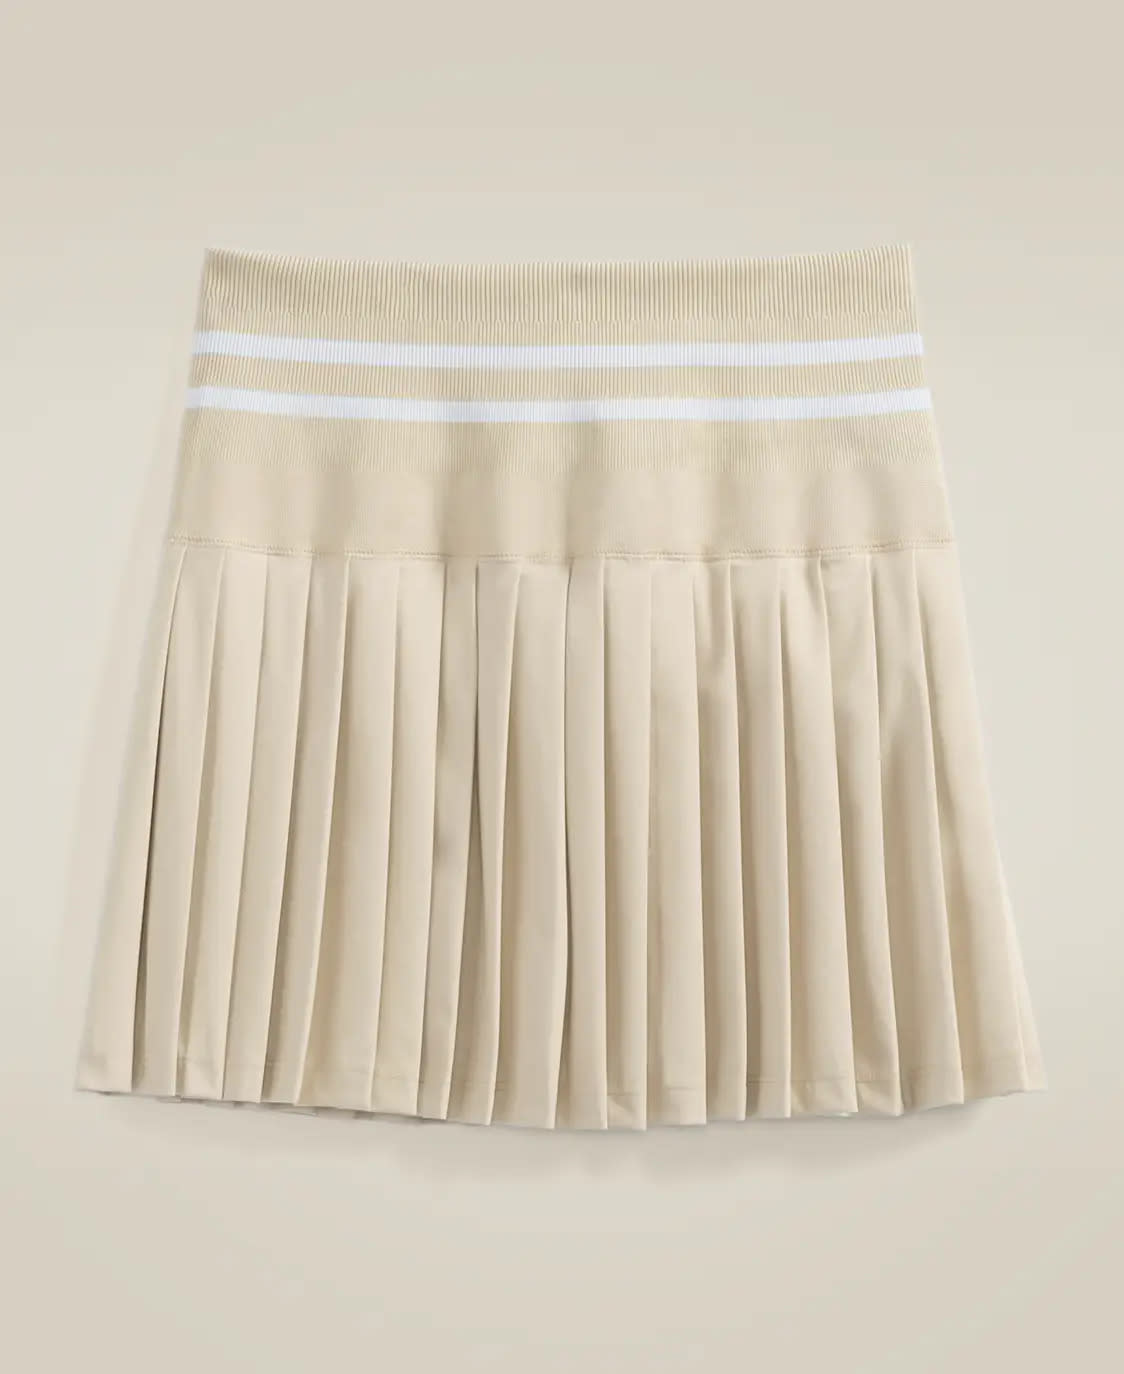 Plated tan tennis skirt with two white lines at wasit.